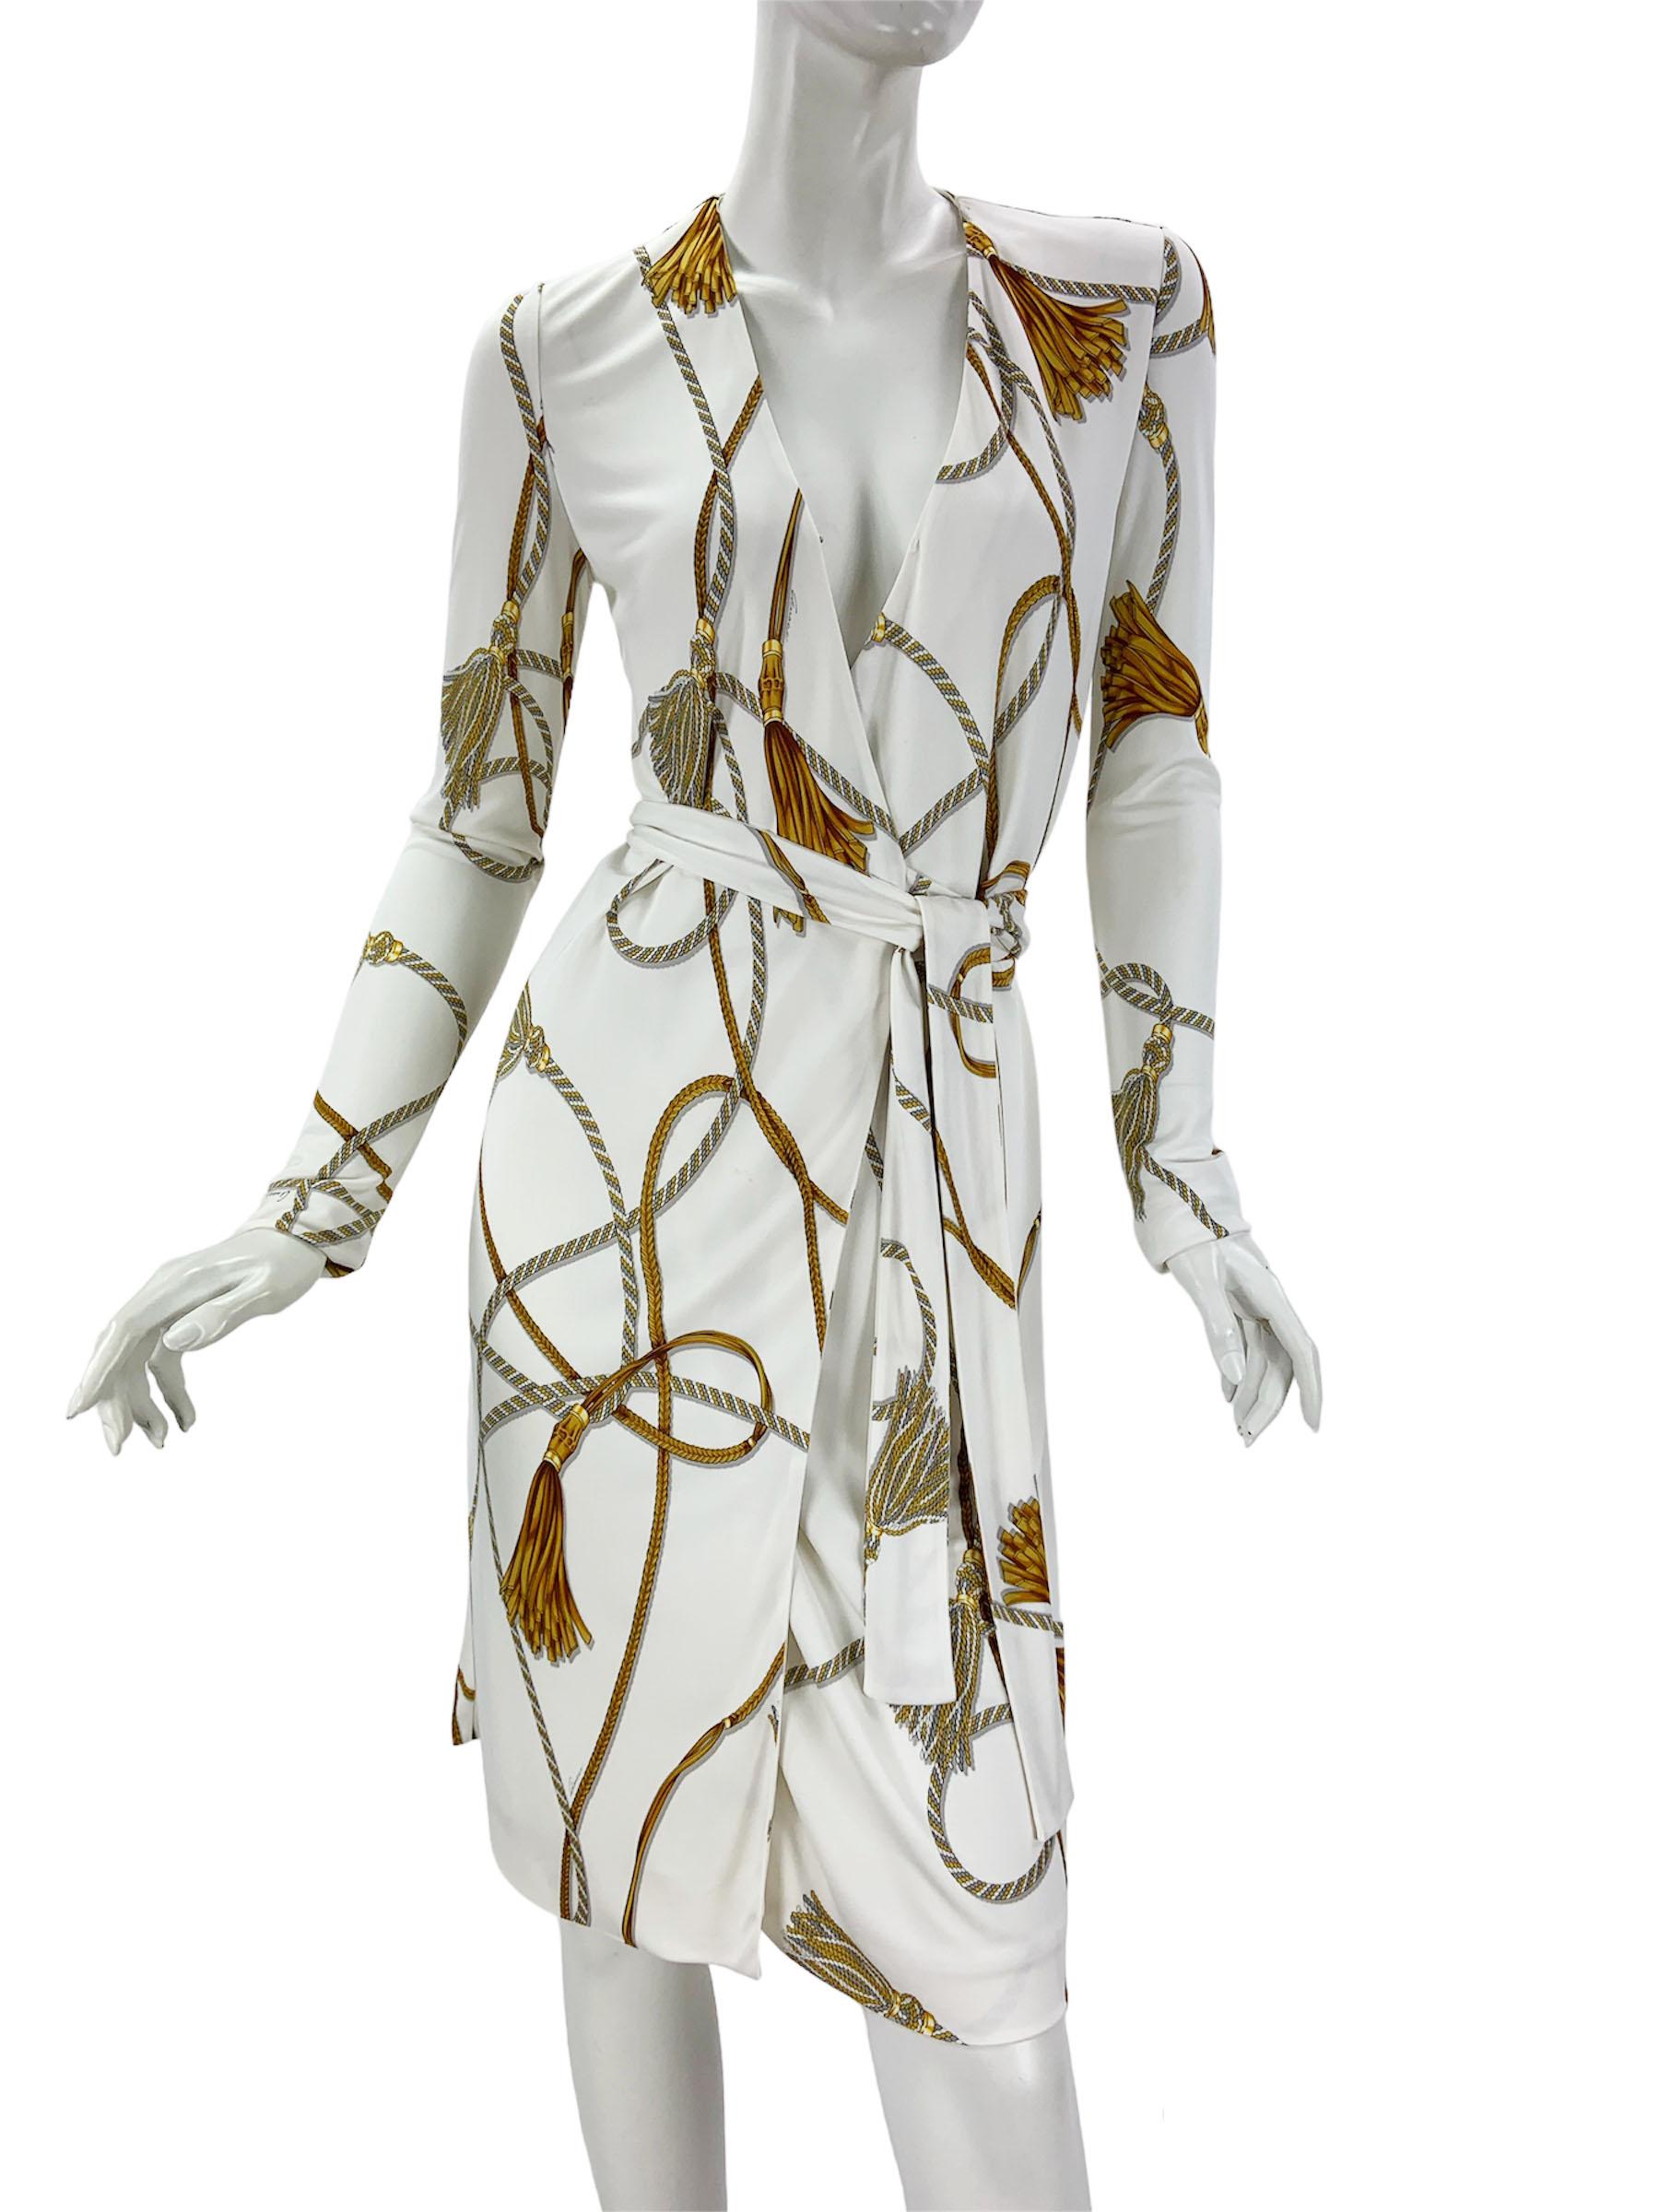 Gucci Vintage White Jersey Wrap Printed Dress
Designer size - S
White background futured signature Gucci tassel with bamboo print.
Plunging neckline, Wrap style with attached belt. Fully lined. Fabric stretchy.
Measurements approx: Length - 40